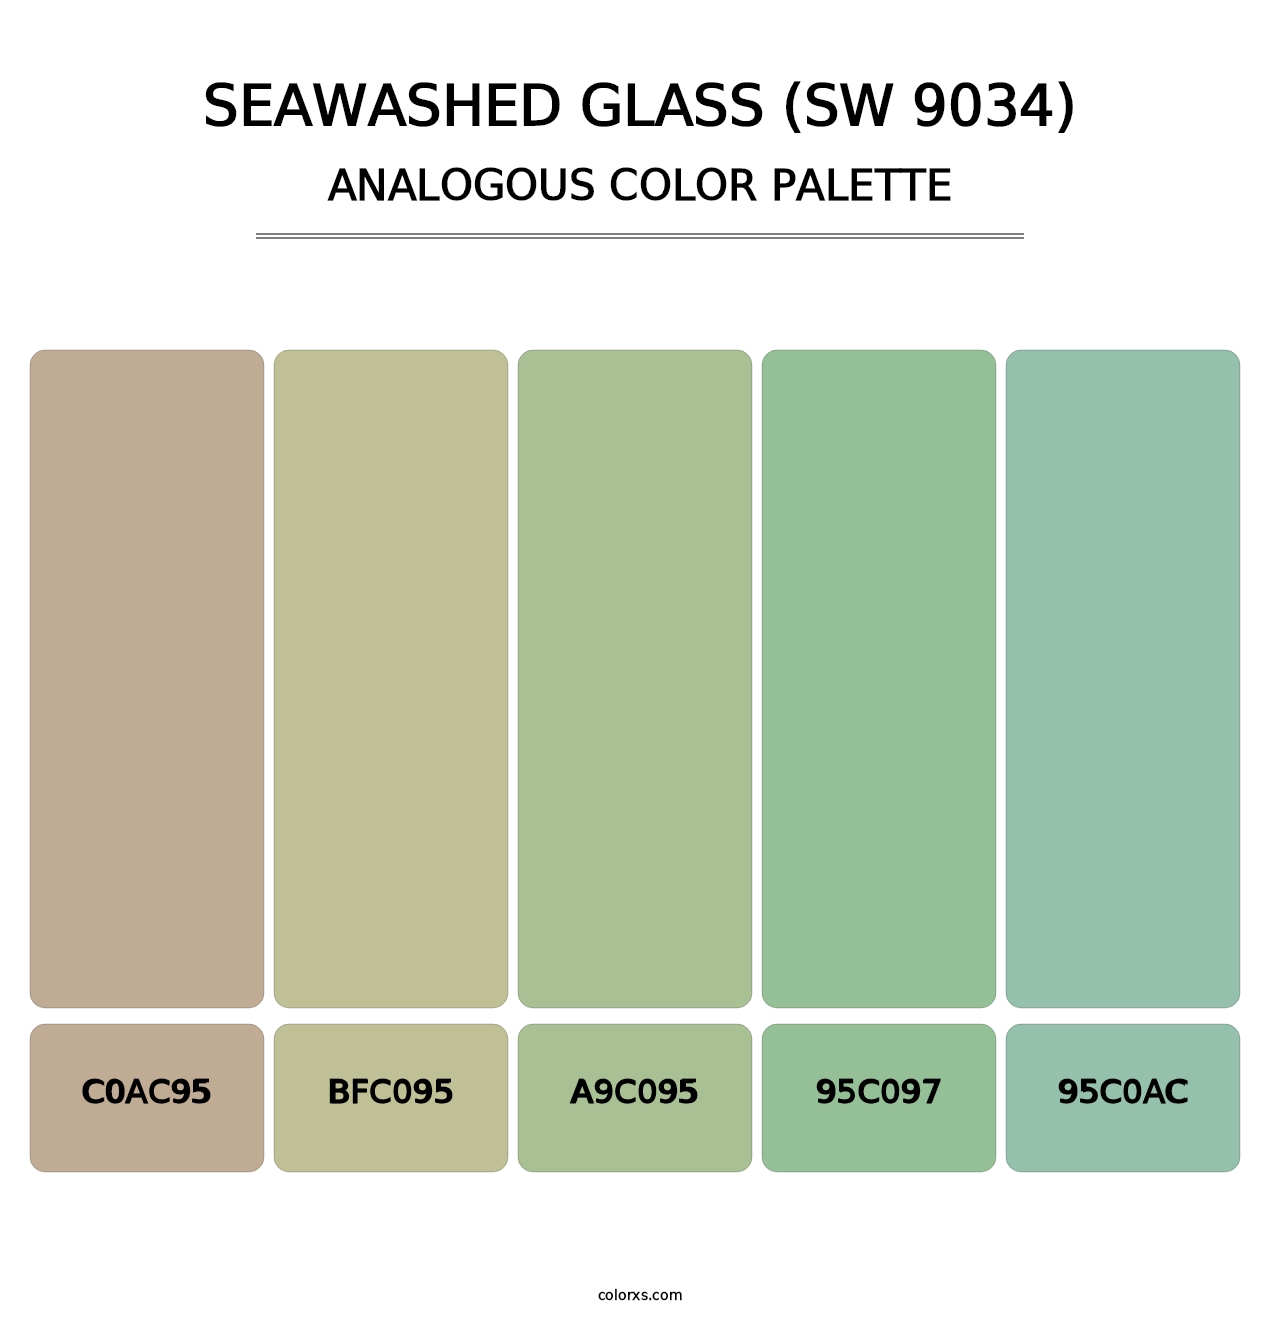 Seawashed Glass (SW 9034) - Analogous Color Palette